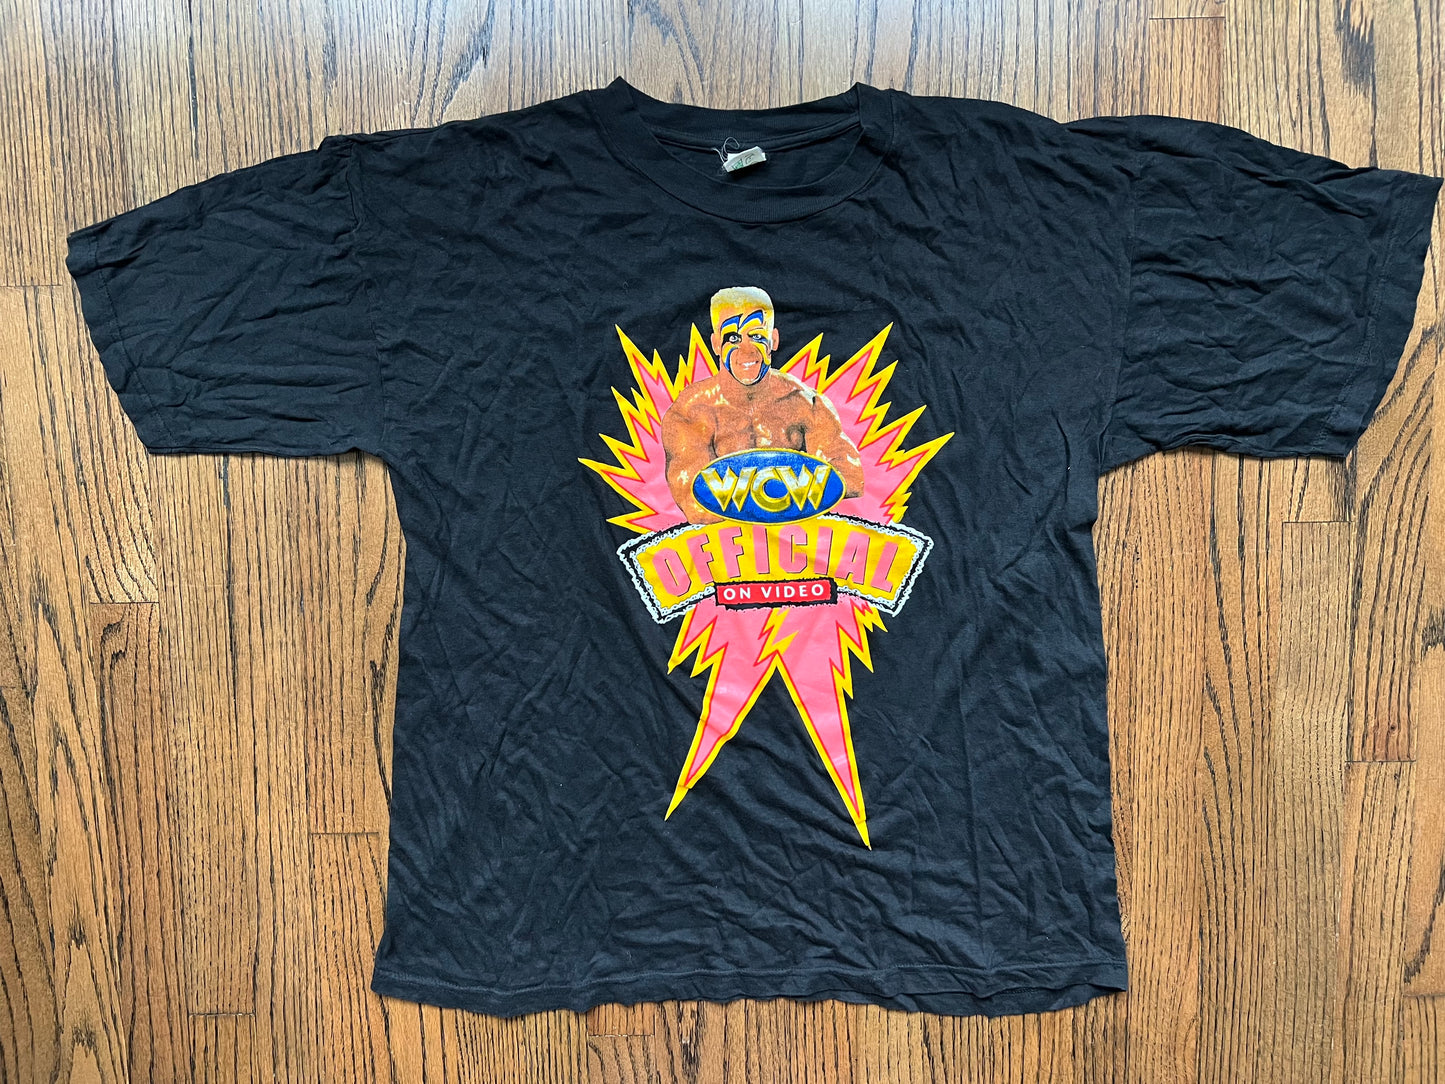 1993 WCW Sting “Official on video” German shirt